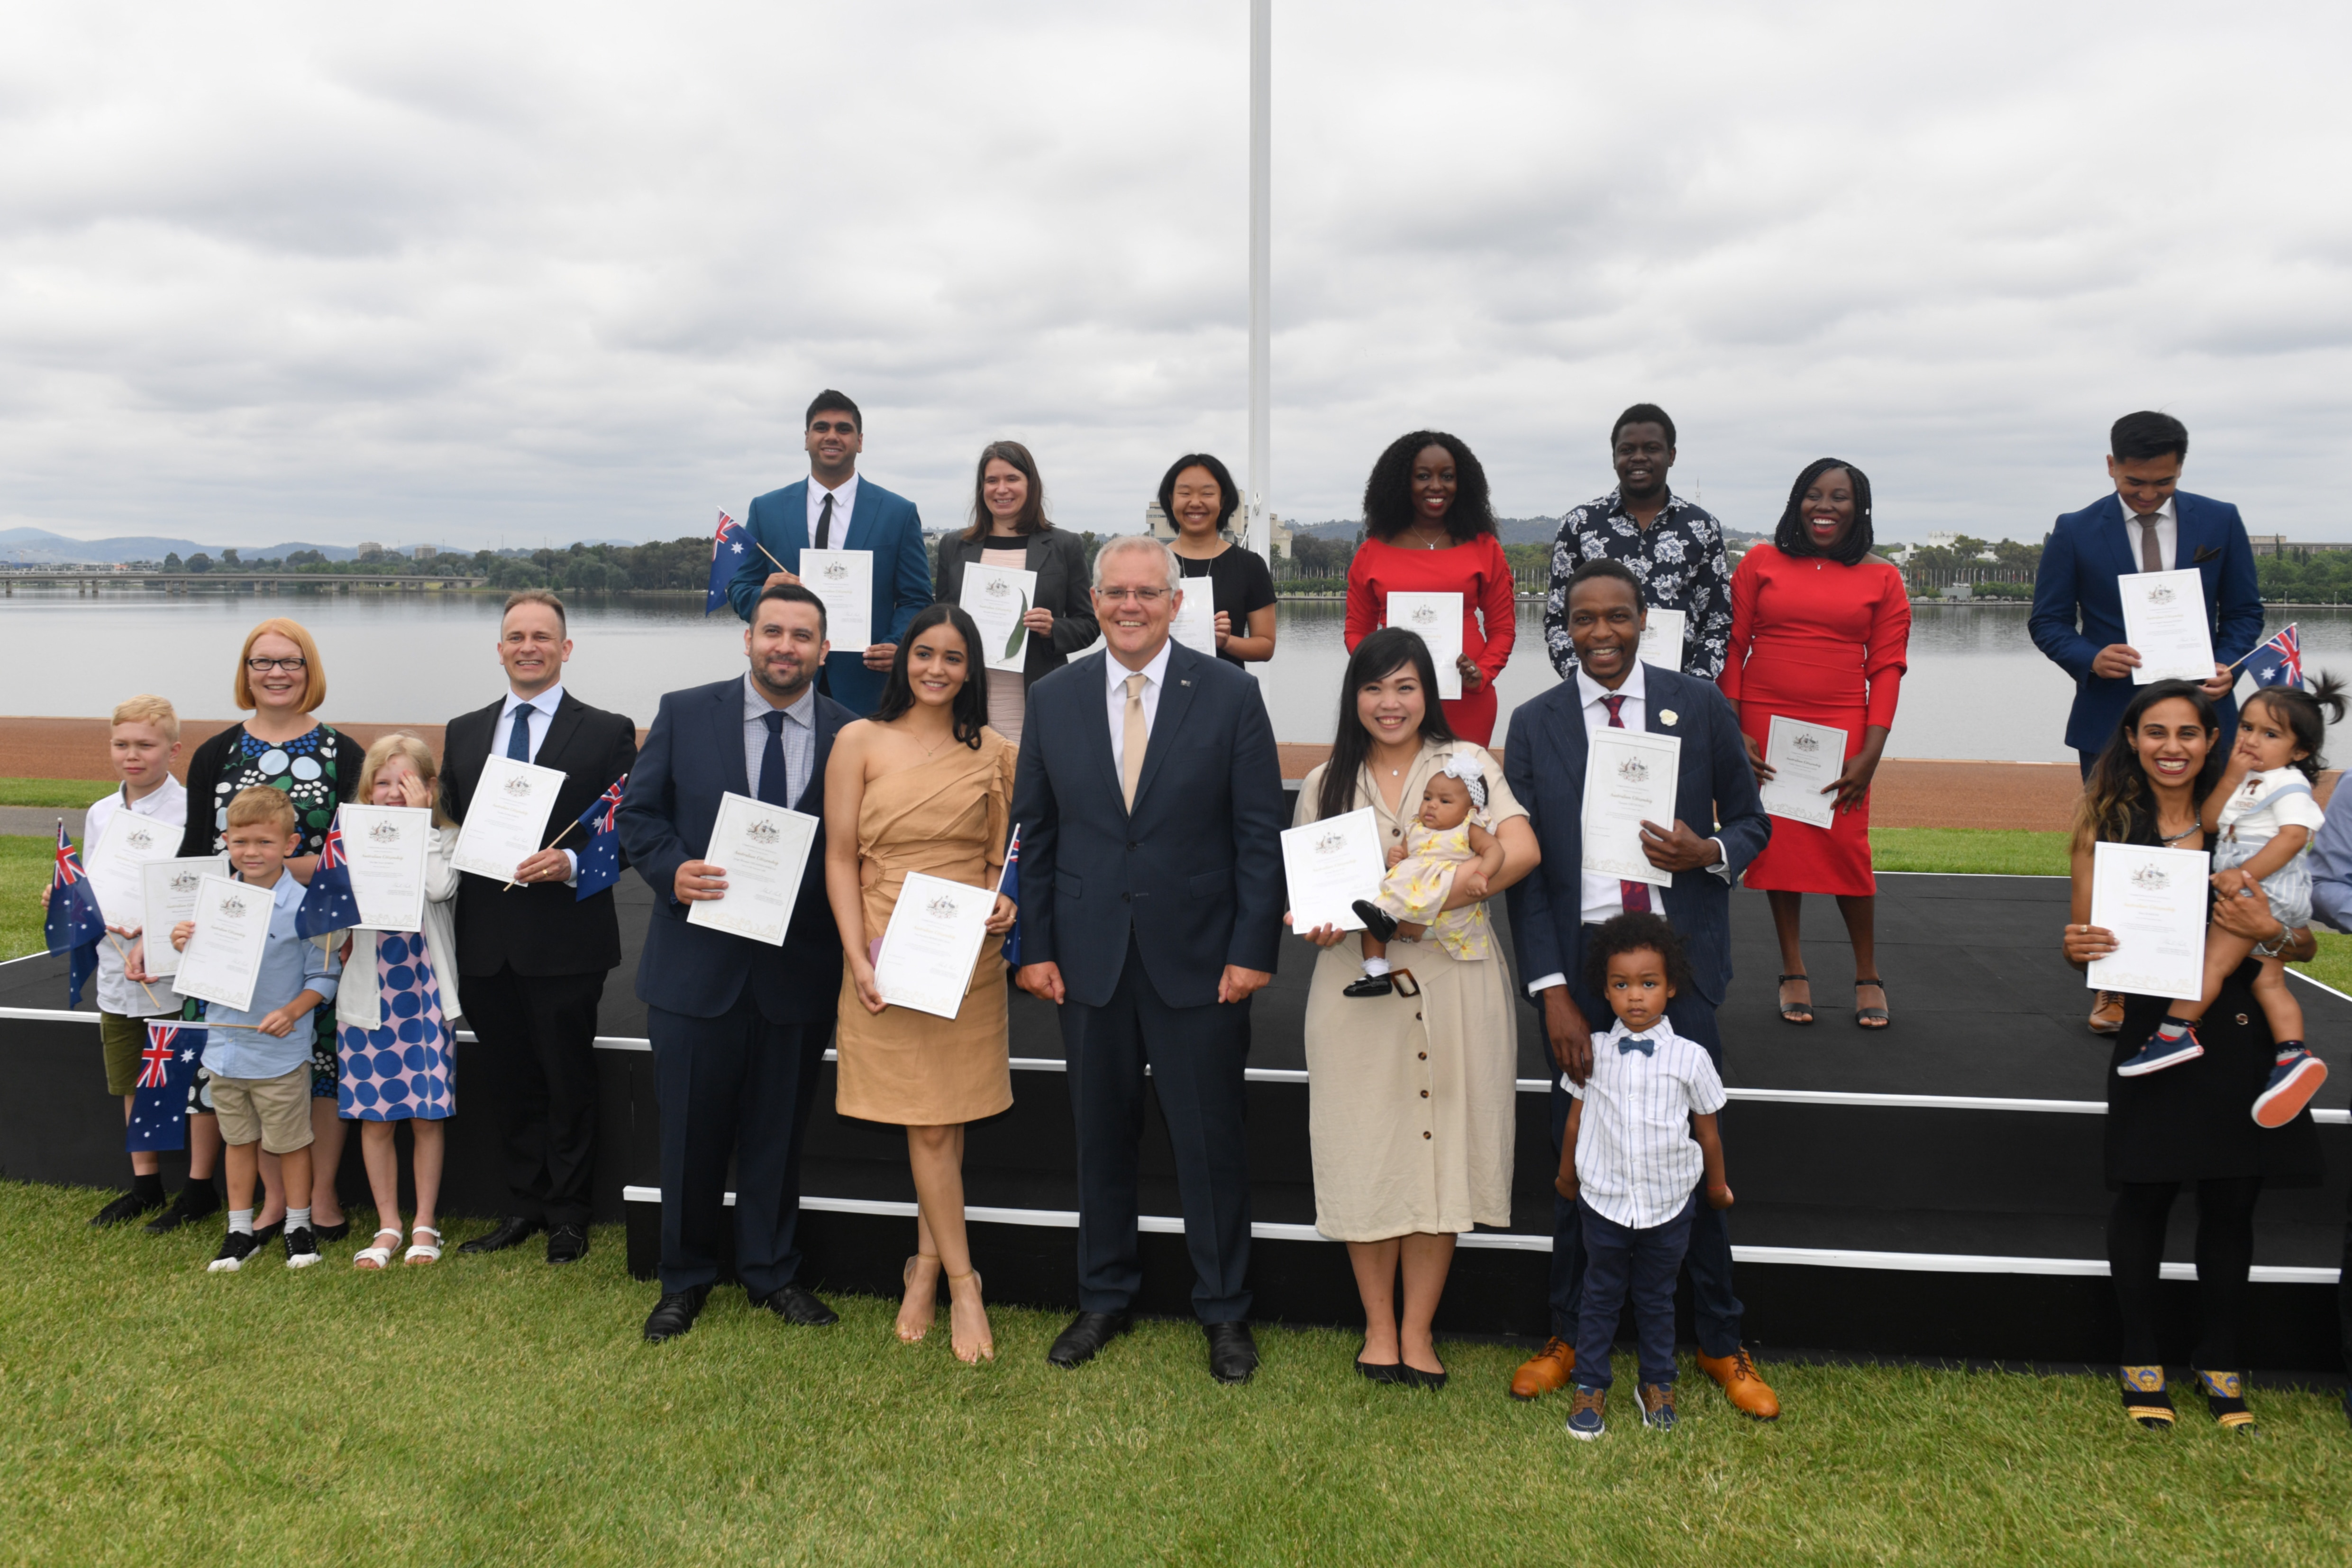 Prime Minister Scott Morrison poses with new Australian citizens during the National Australia Day Flag Raising and Citizenship Ceremony in Canberra.